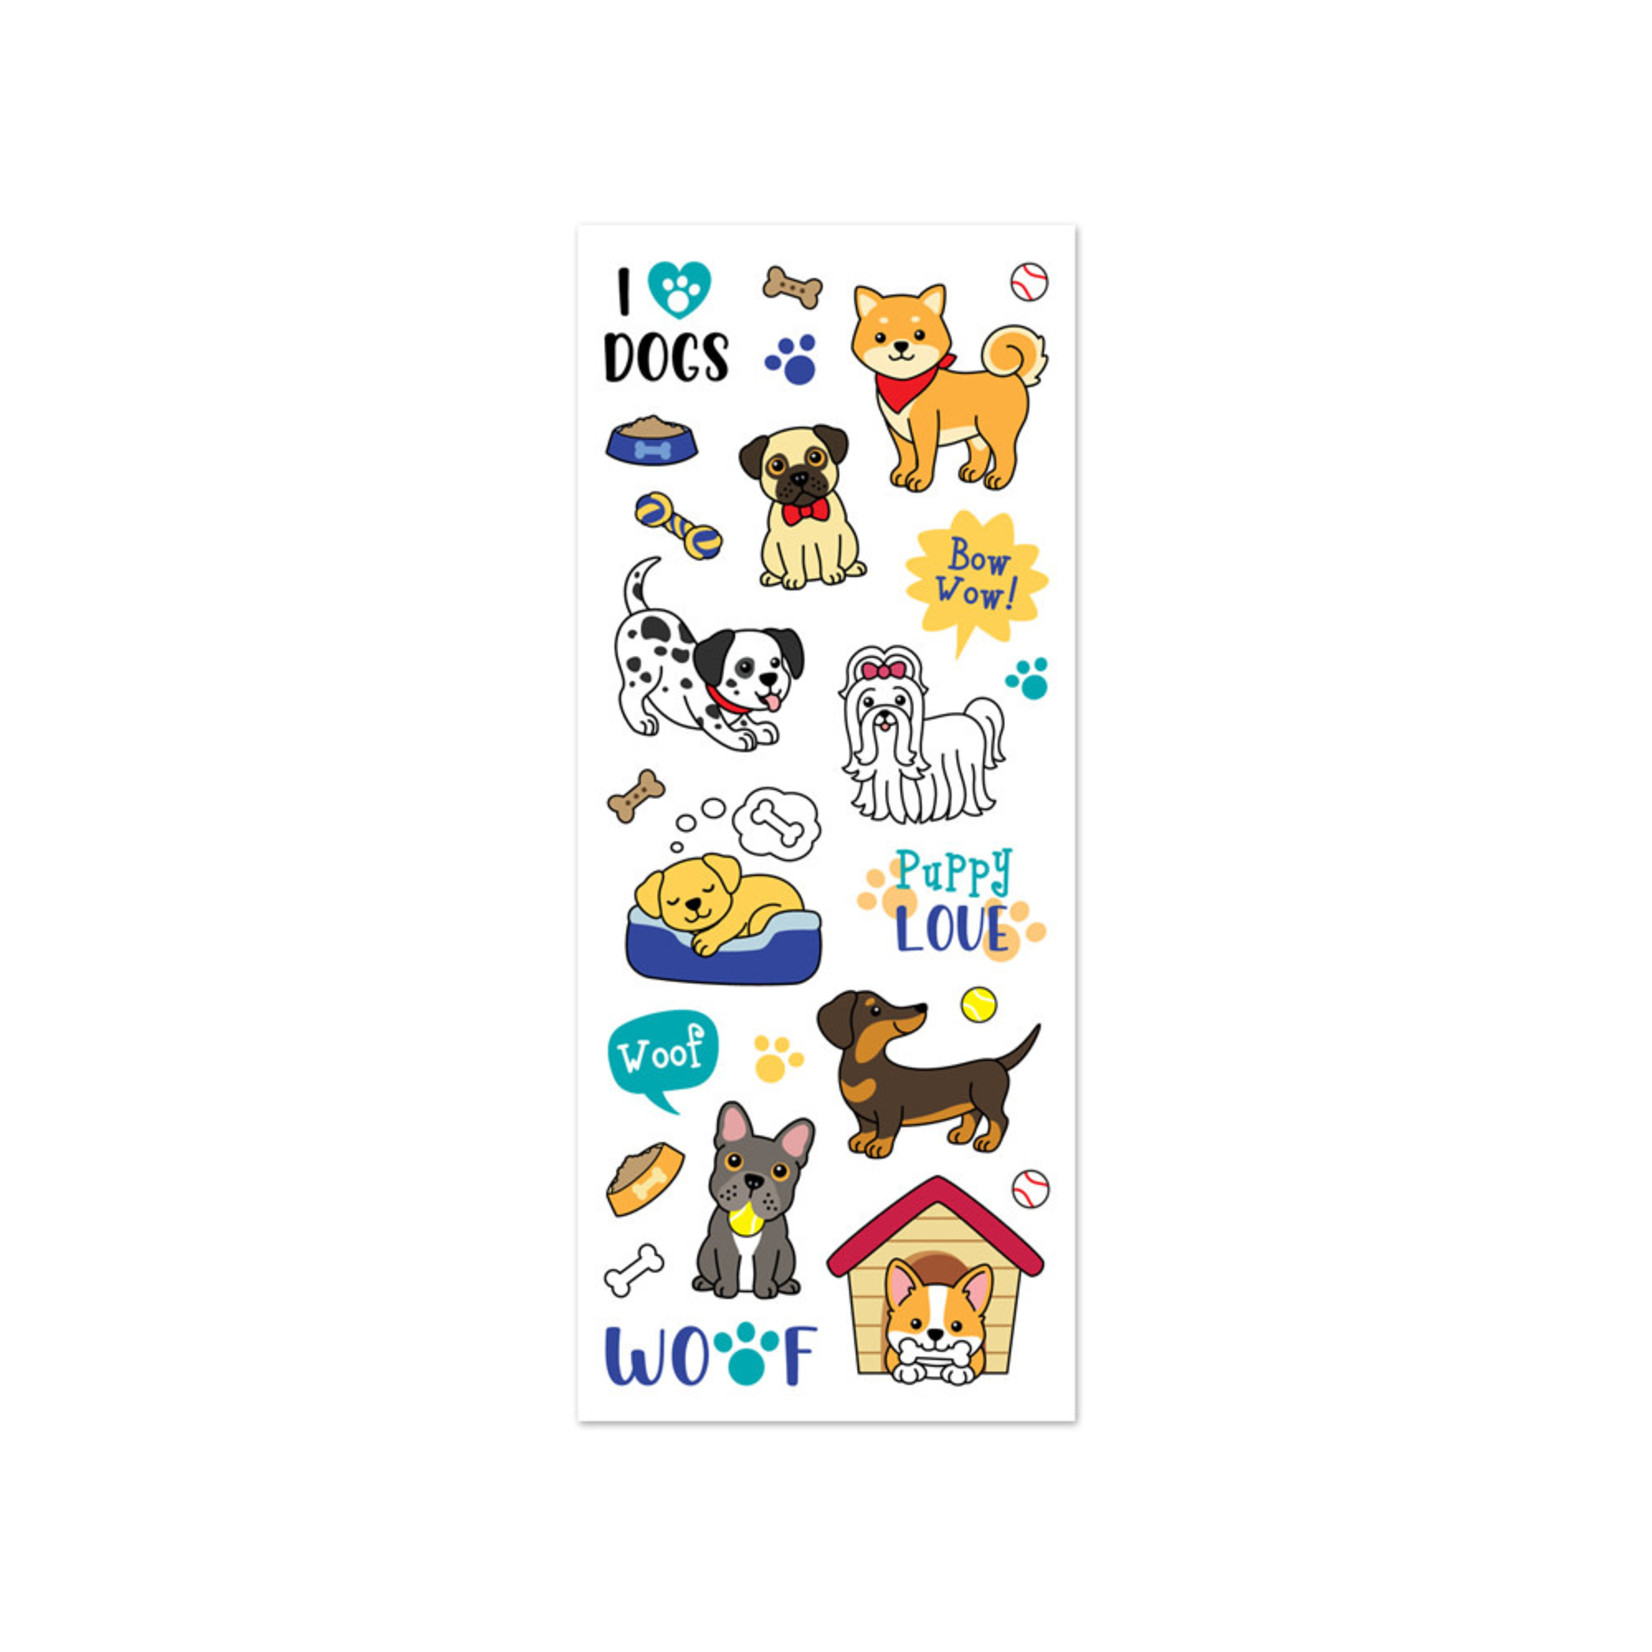 PAPER CRAFT STICKER: 5IN X12IN CLASSIC THEMES 'CLEAR' PHOTO SAFE 05) DOG LIFE